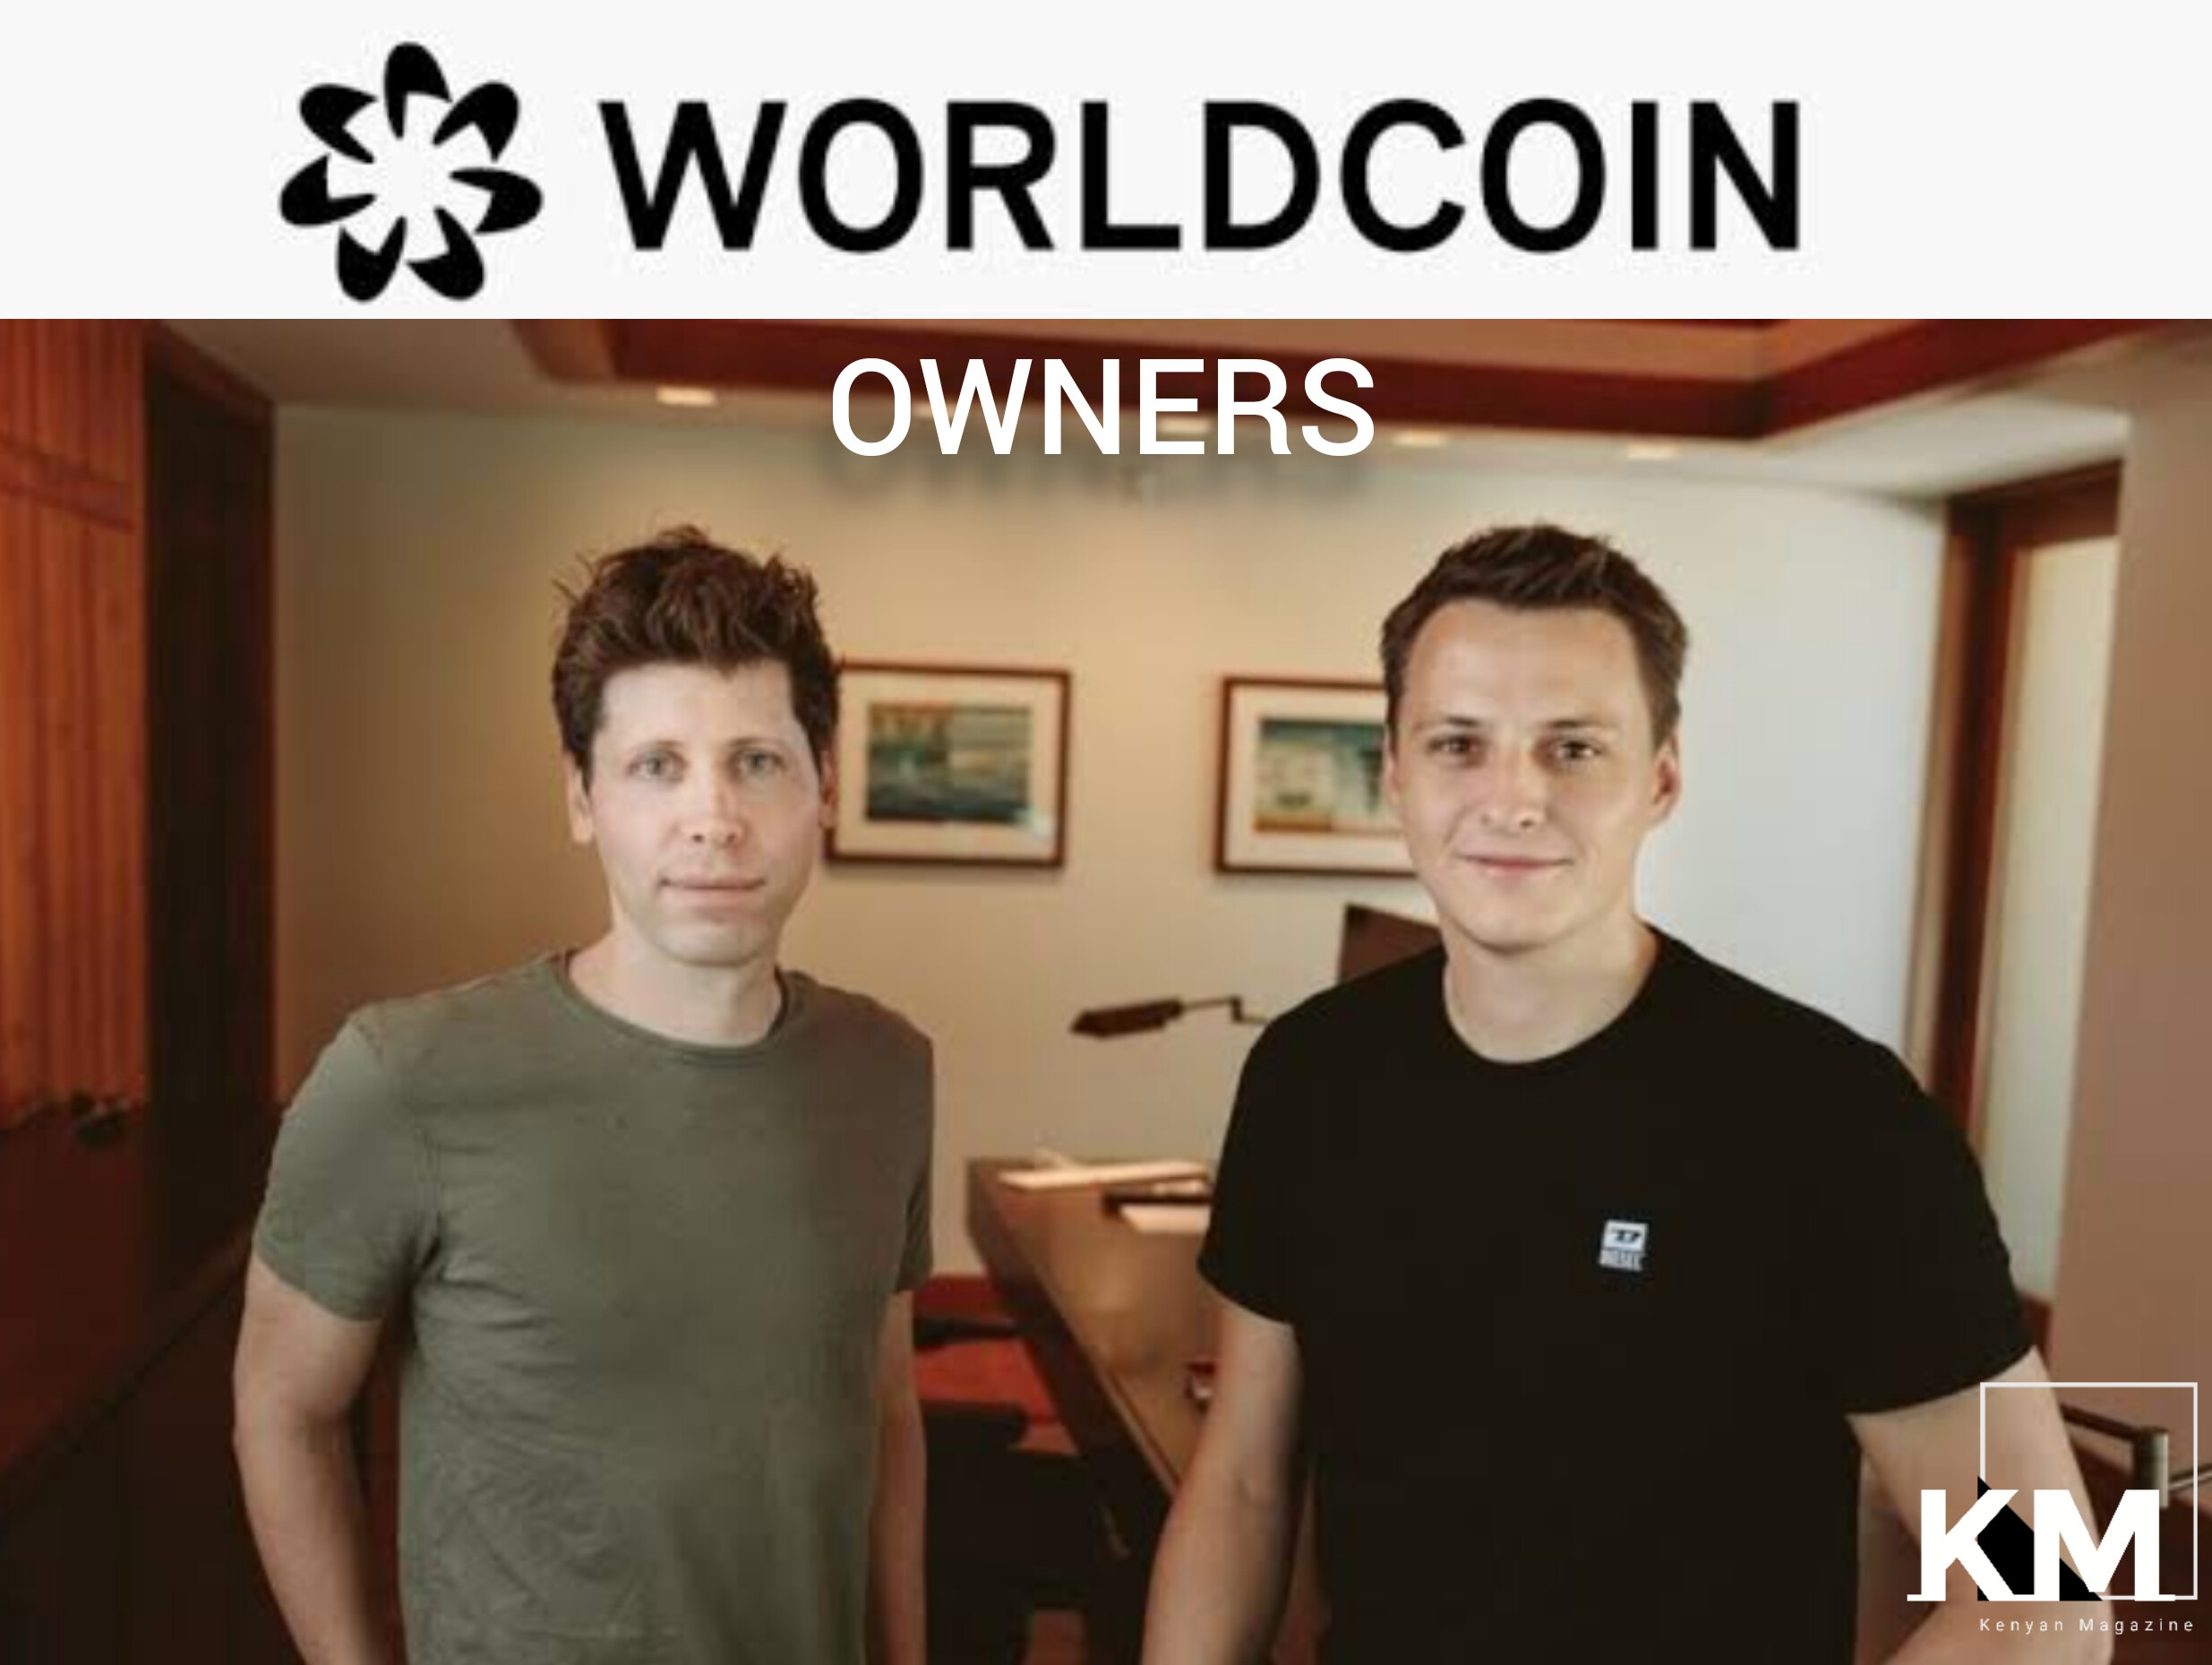 Worldcoin owners